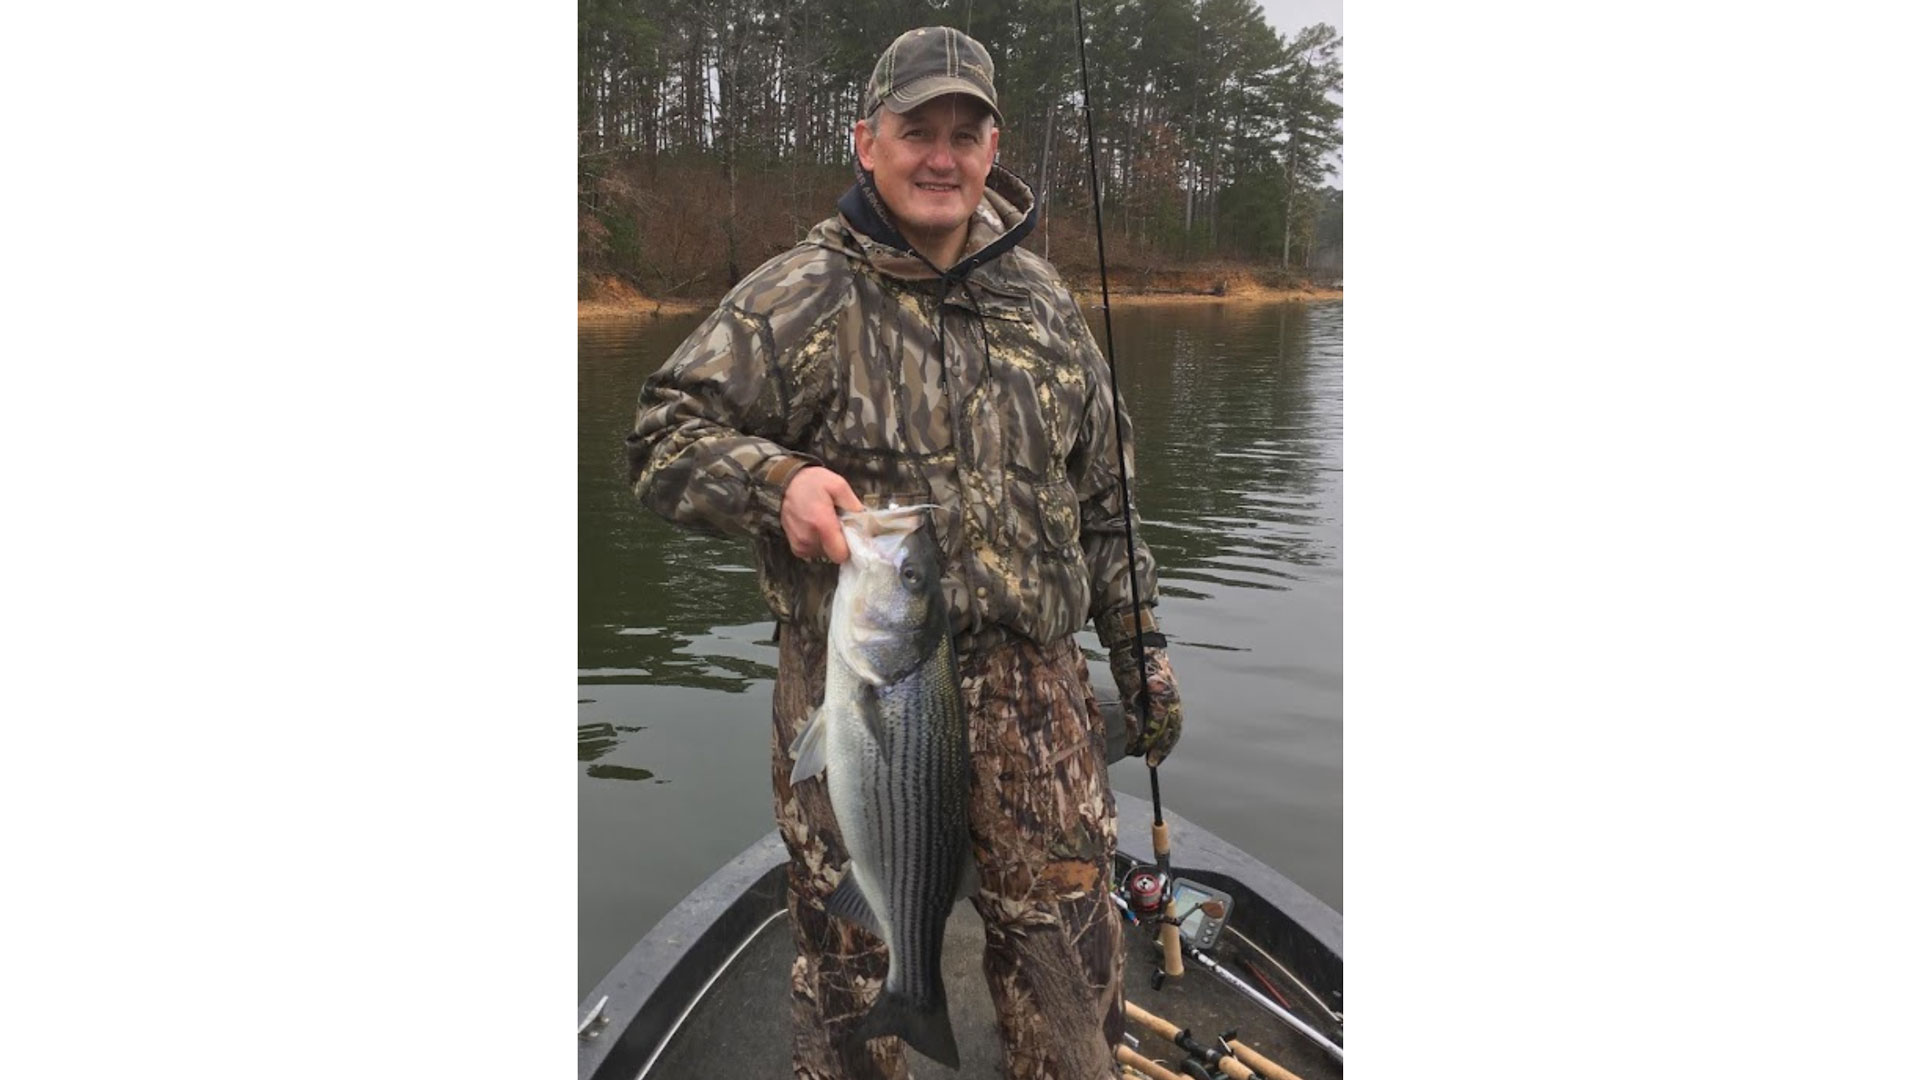 rep. bruce western with the day's catch